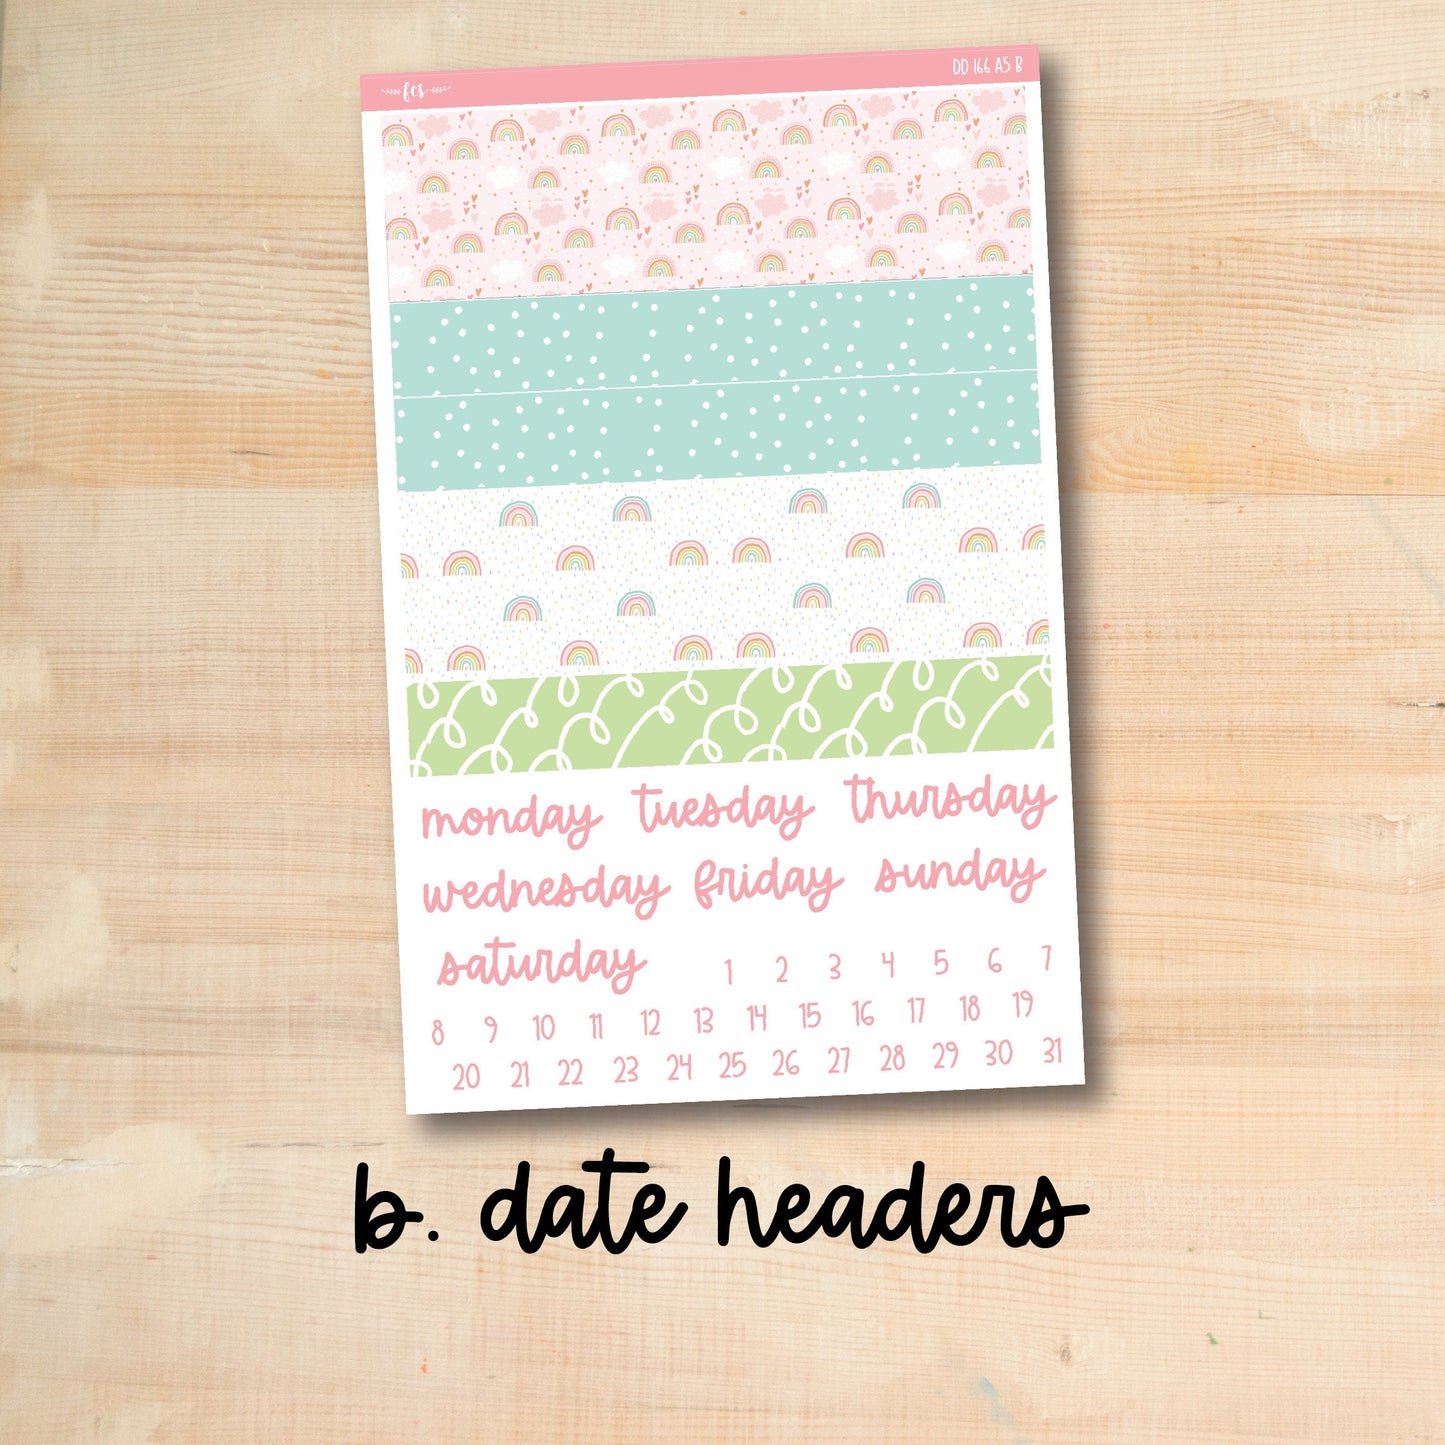 A5 Daily Duo 166 || SUNNY SKIES A5 Erin Condren daily duo kit